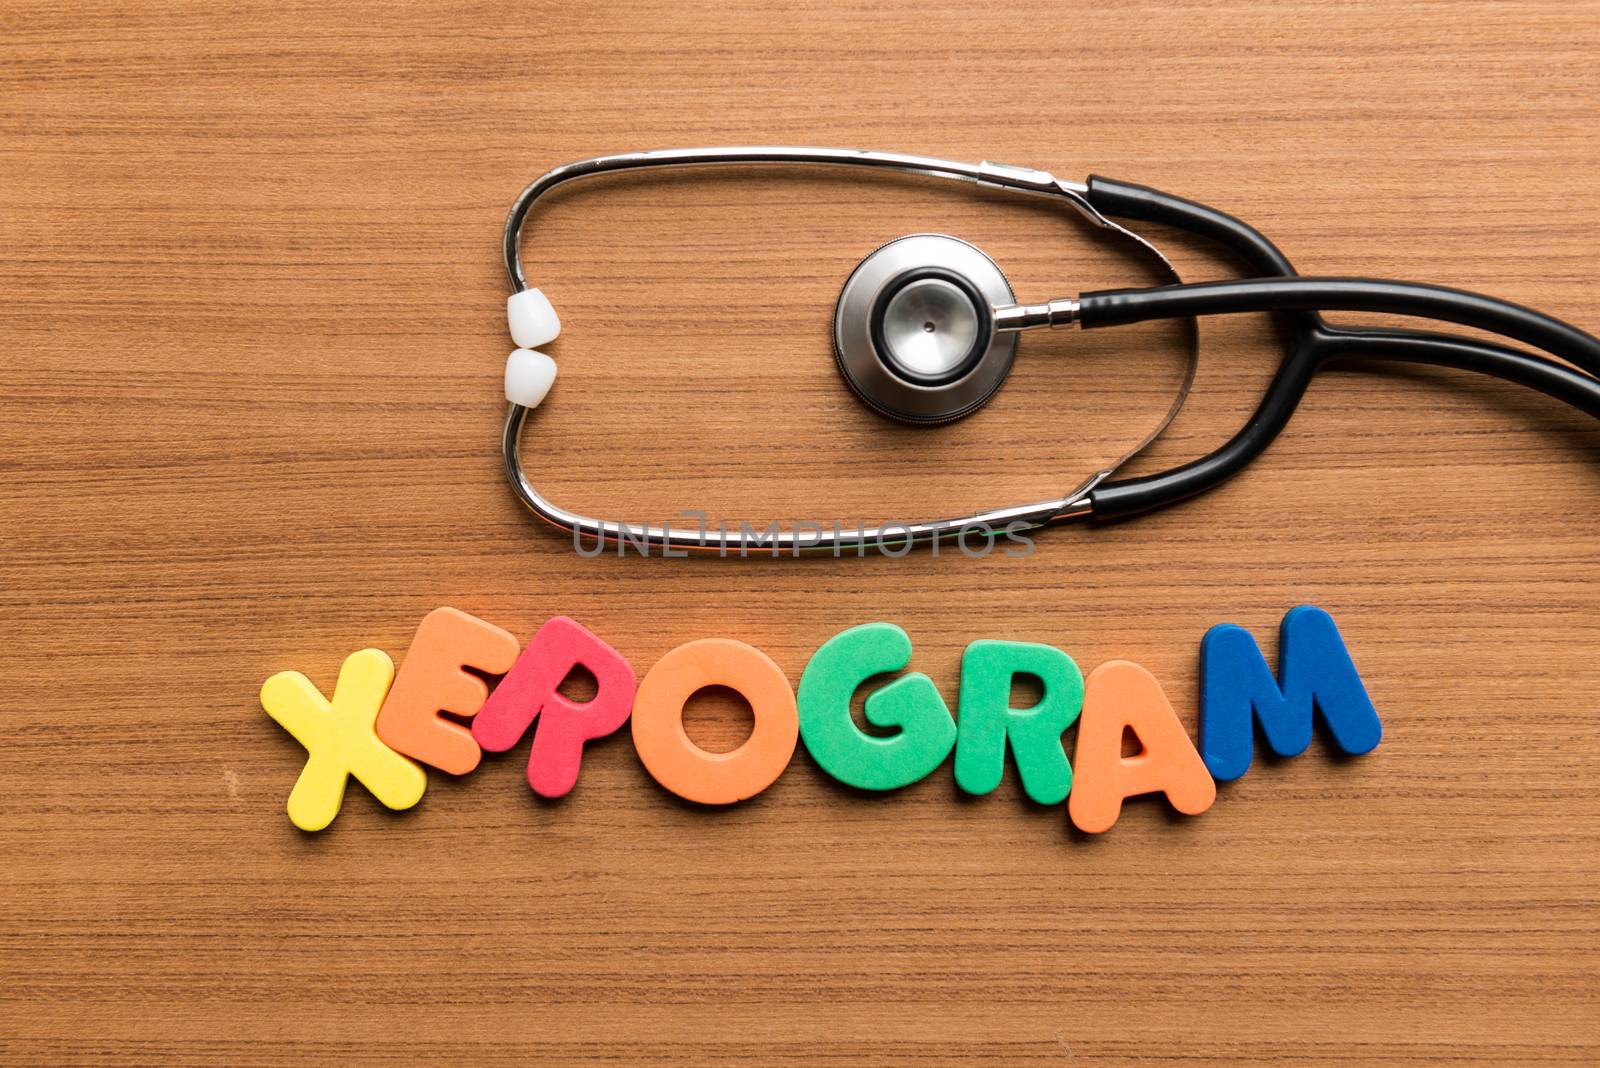 xerogram colorful word with stethoscope on wooden background